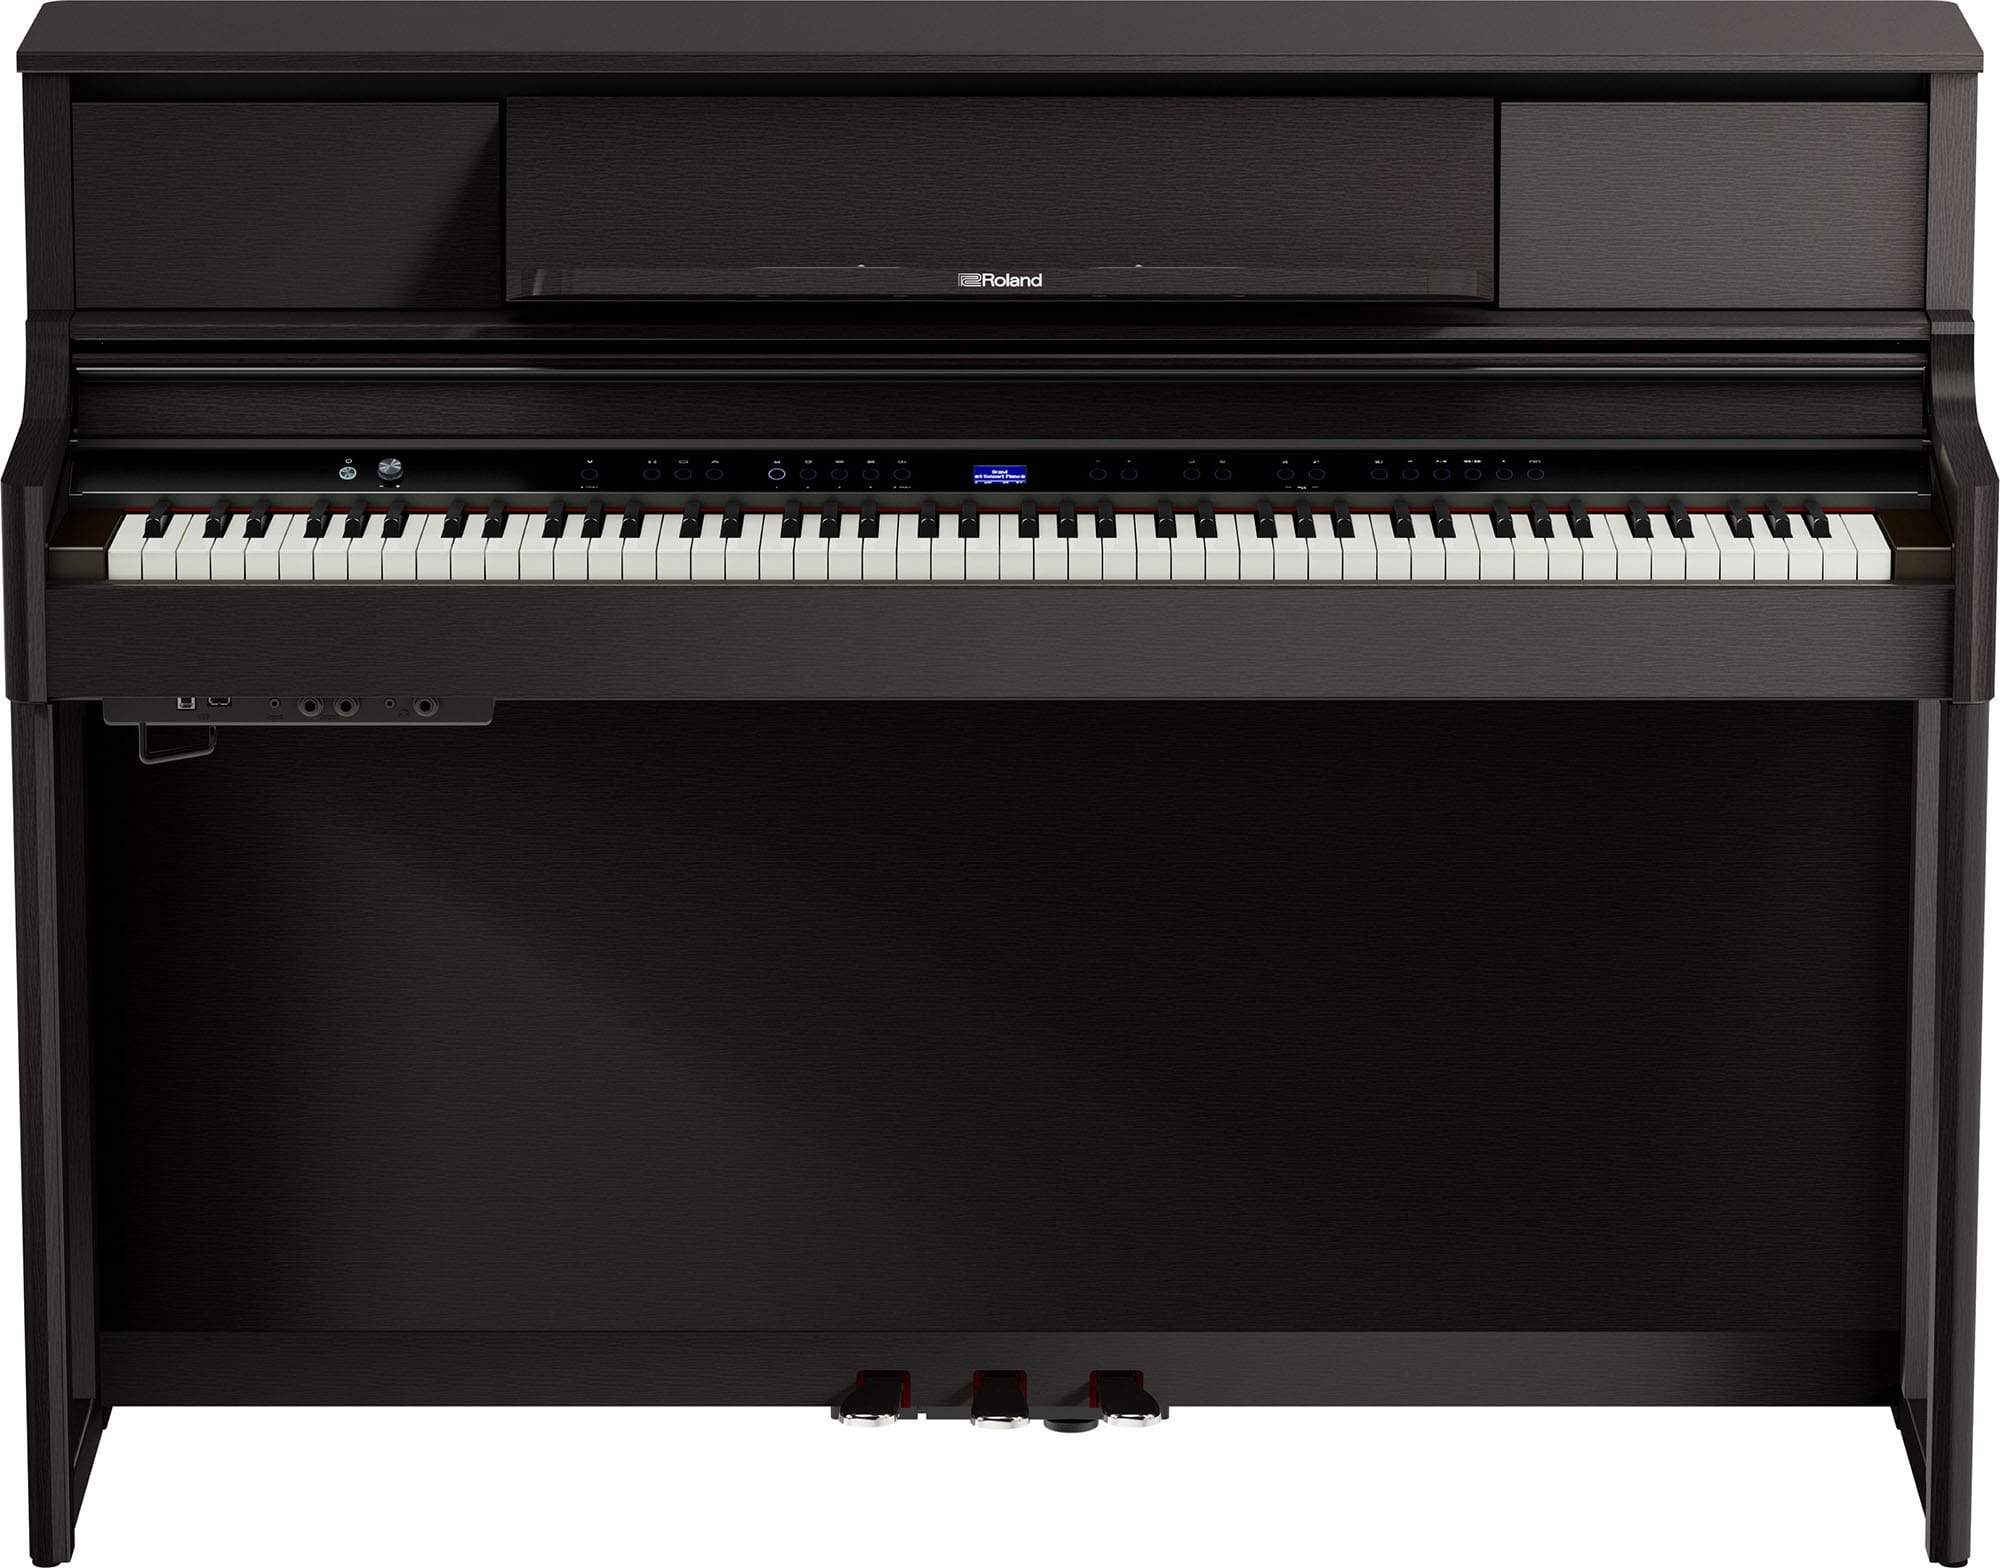 Roland Lx-5-dr - Dark Rosewood - Piano digital con mueble - Main picture